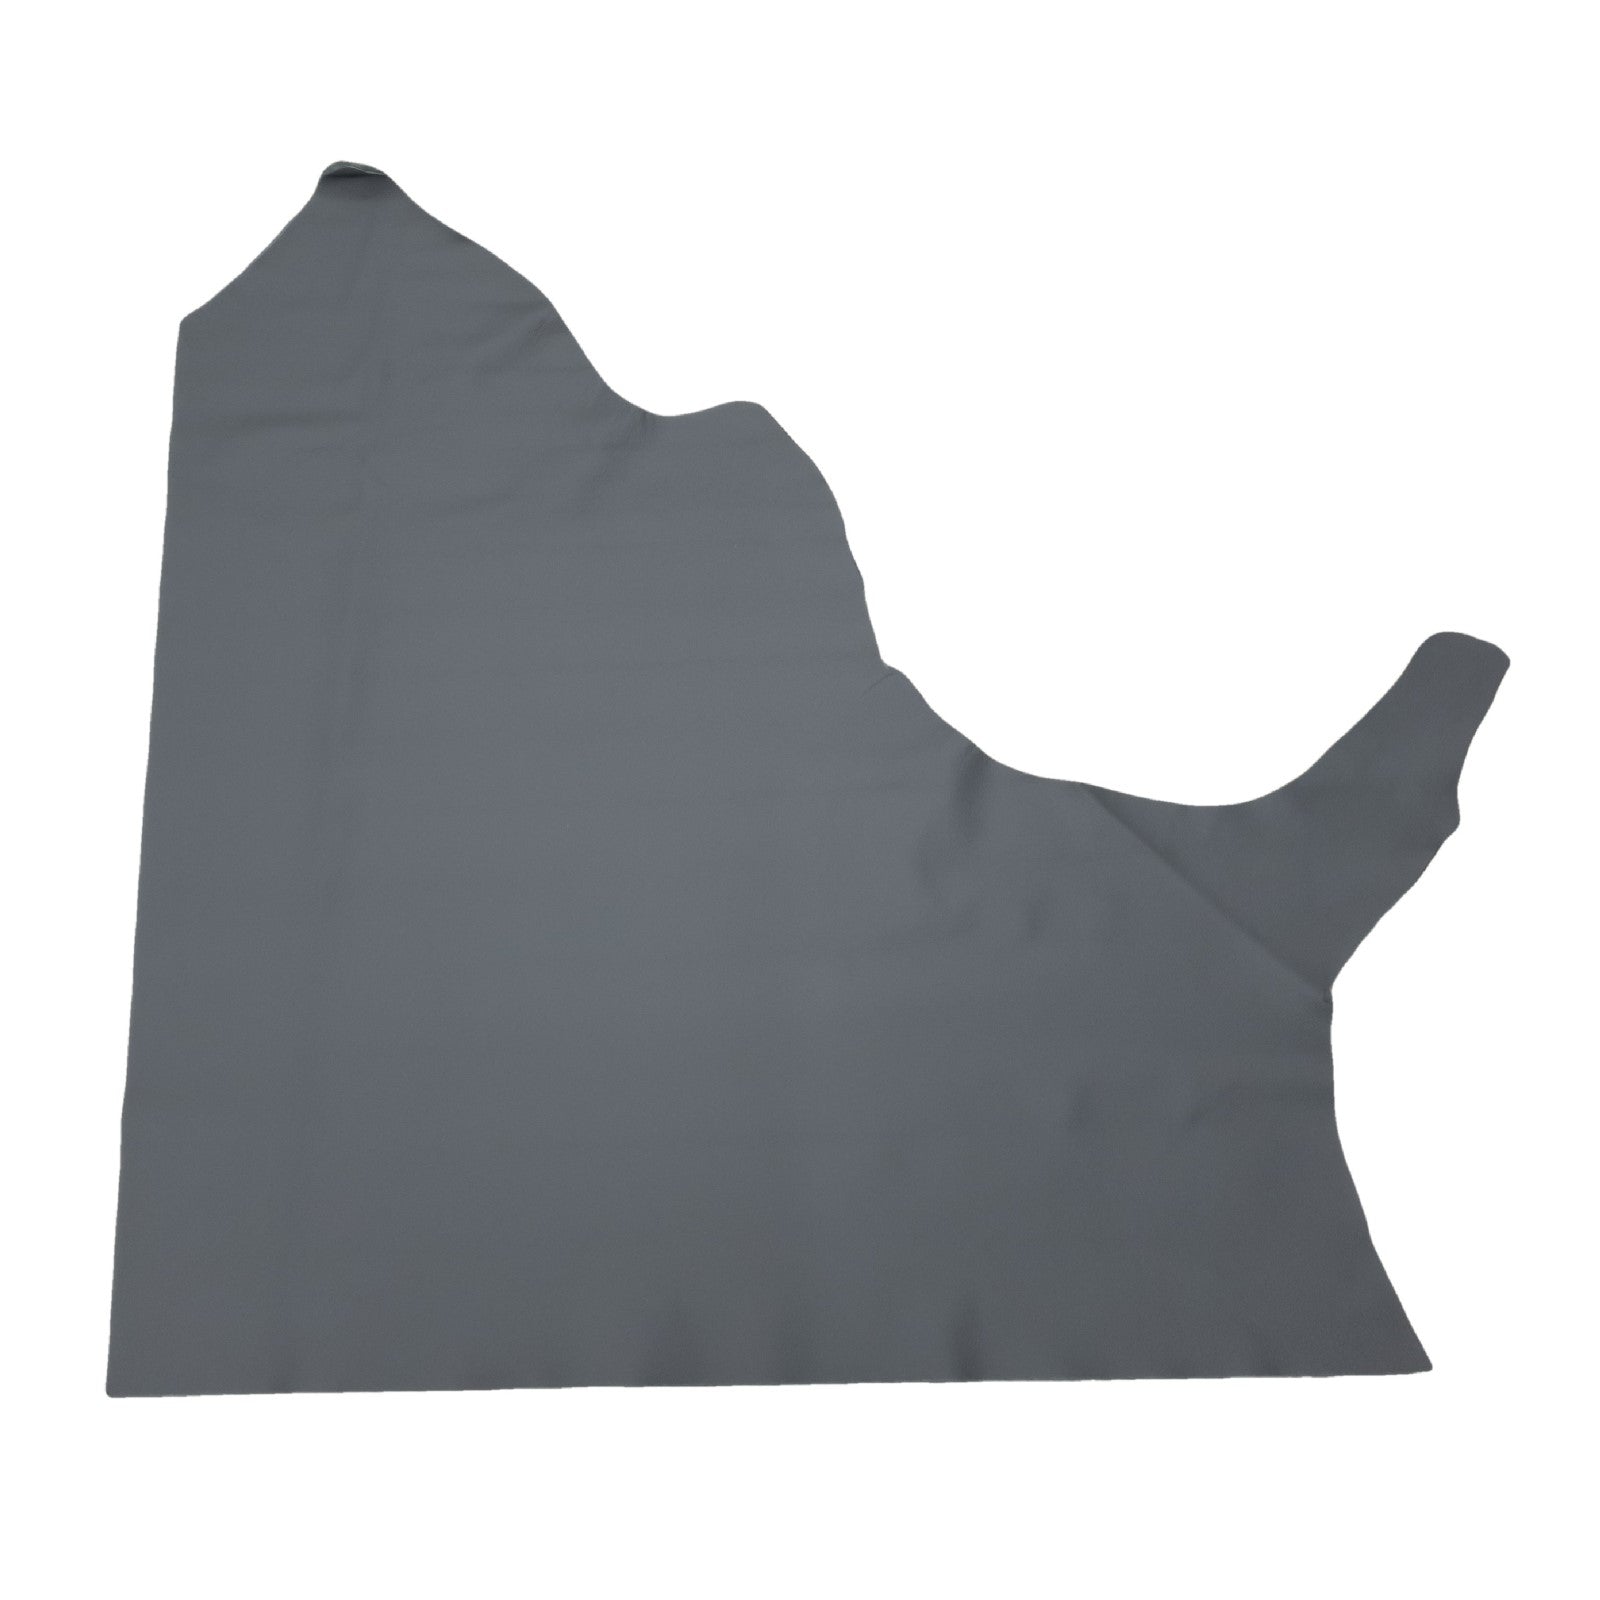 Tough Grey, 5.5-23 Sq Ft, 2.5-3 oz Cow Hides, Vital Upholstery Collection, 5.5-6.5 / Project Piece (Top) | The Leather Guy